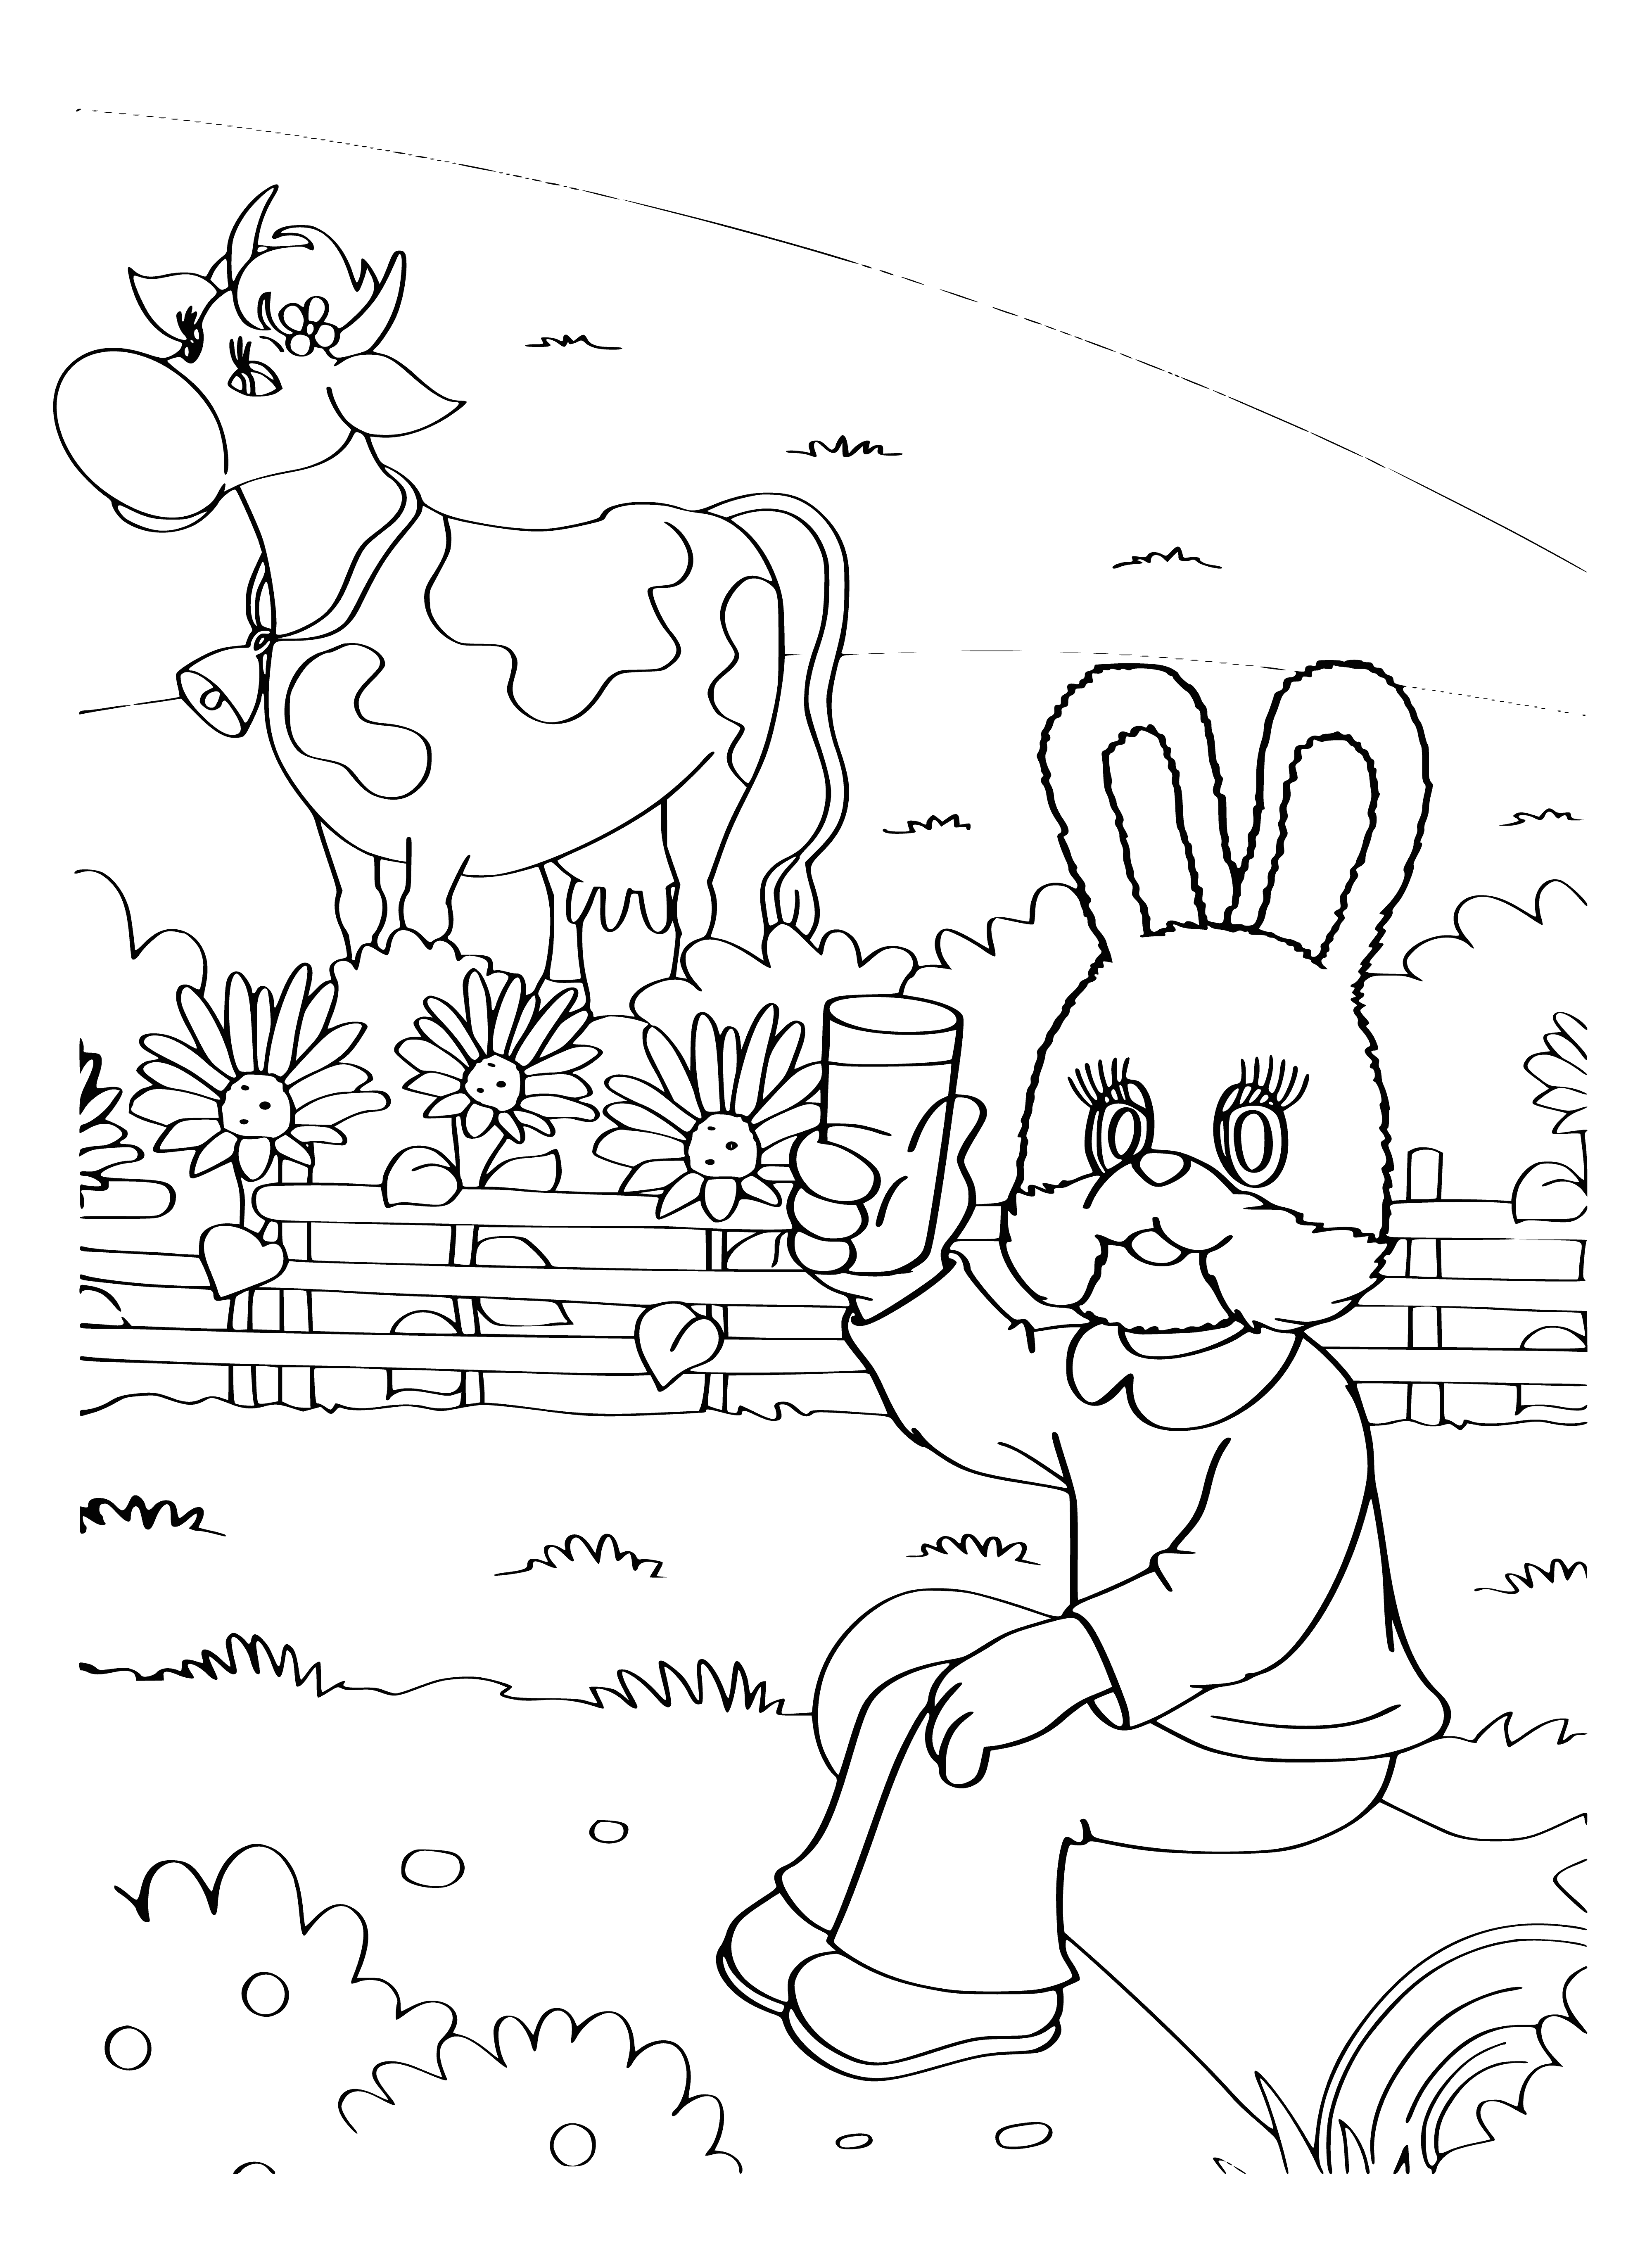 coloring page: A big stepashka says goodnight to children in their beds, some with eyes open while others appear asleep. The stepashka has a kind expression.